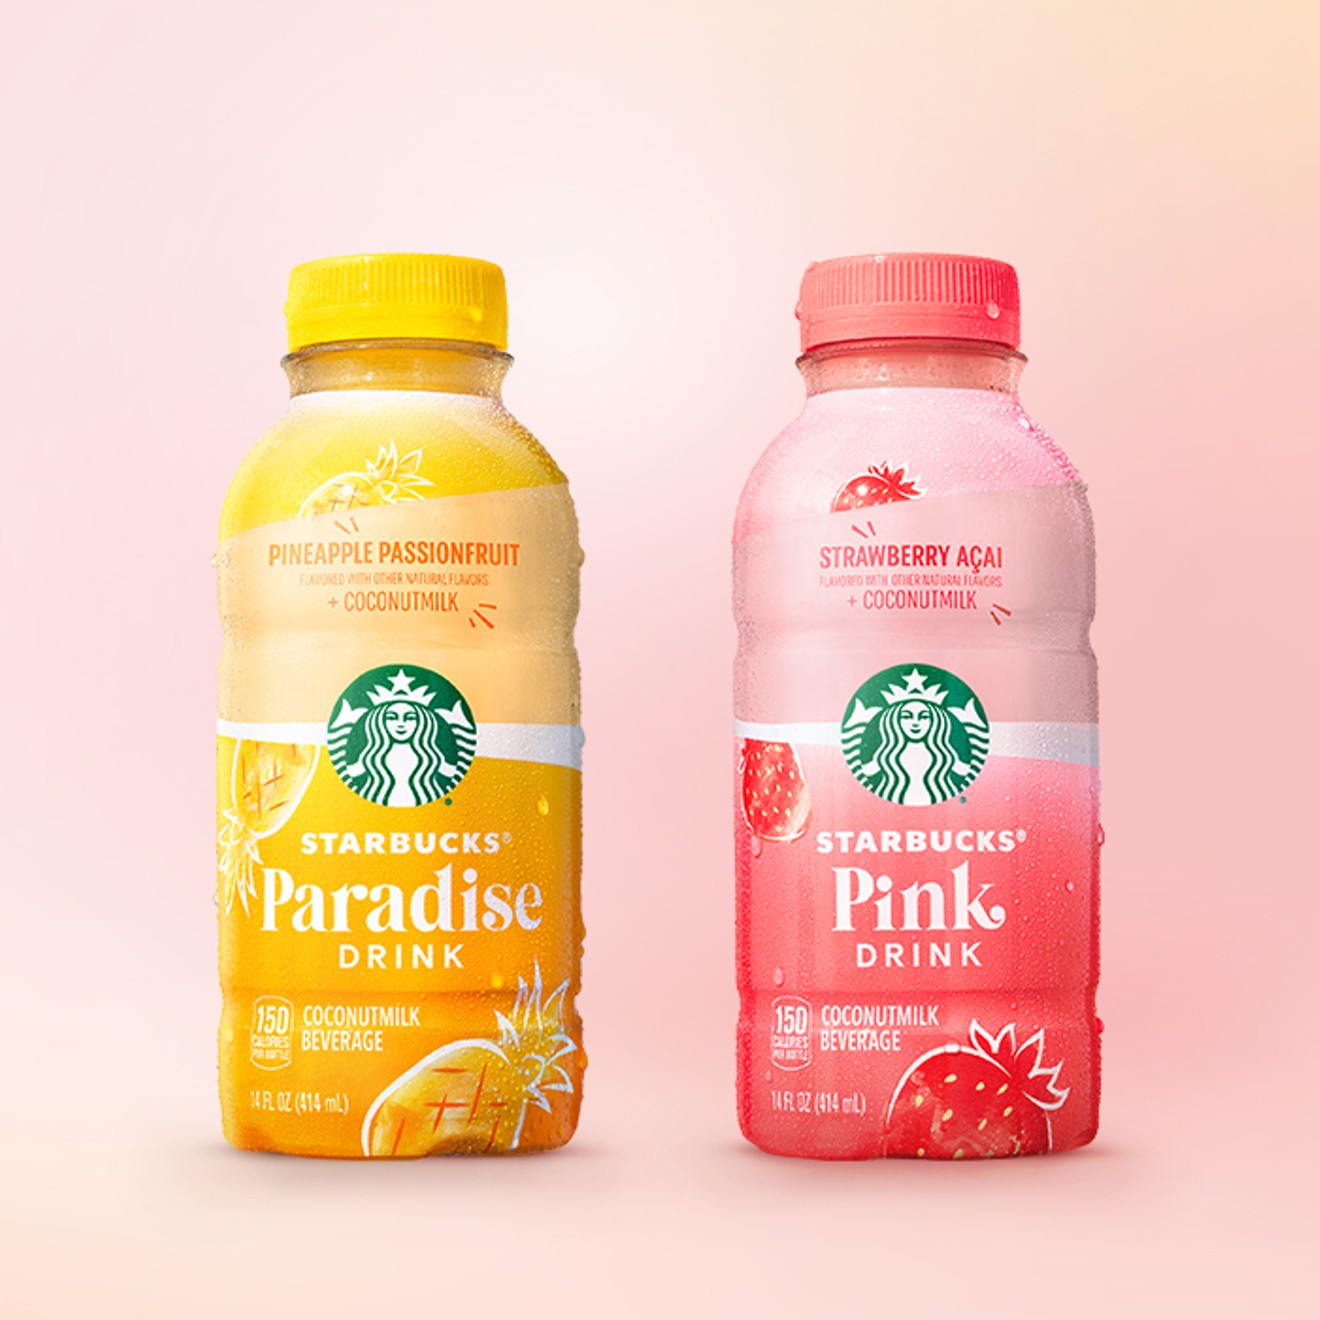 These new drinks are on shelves starting April 10.